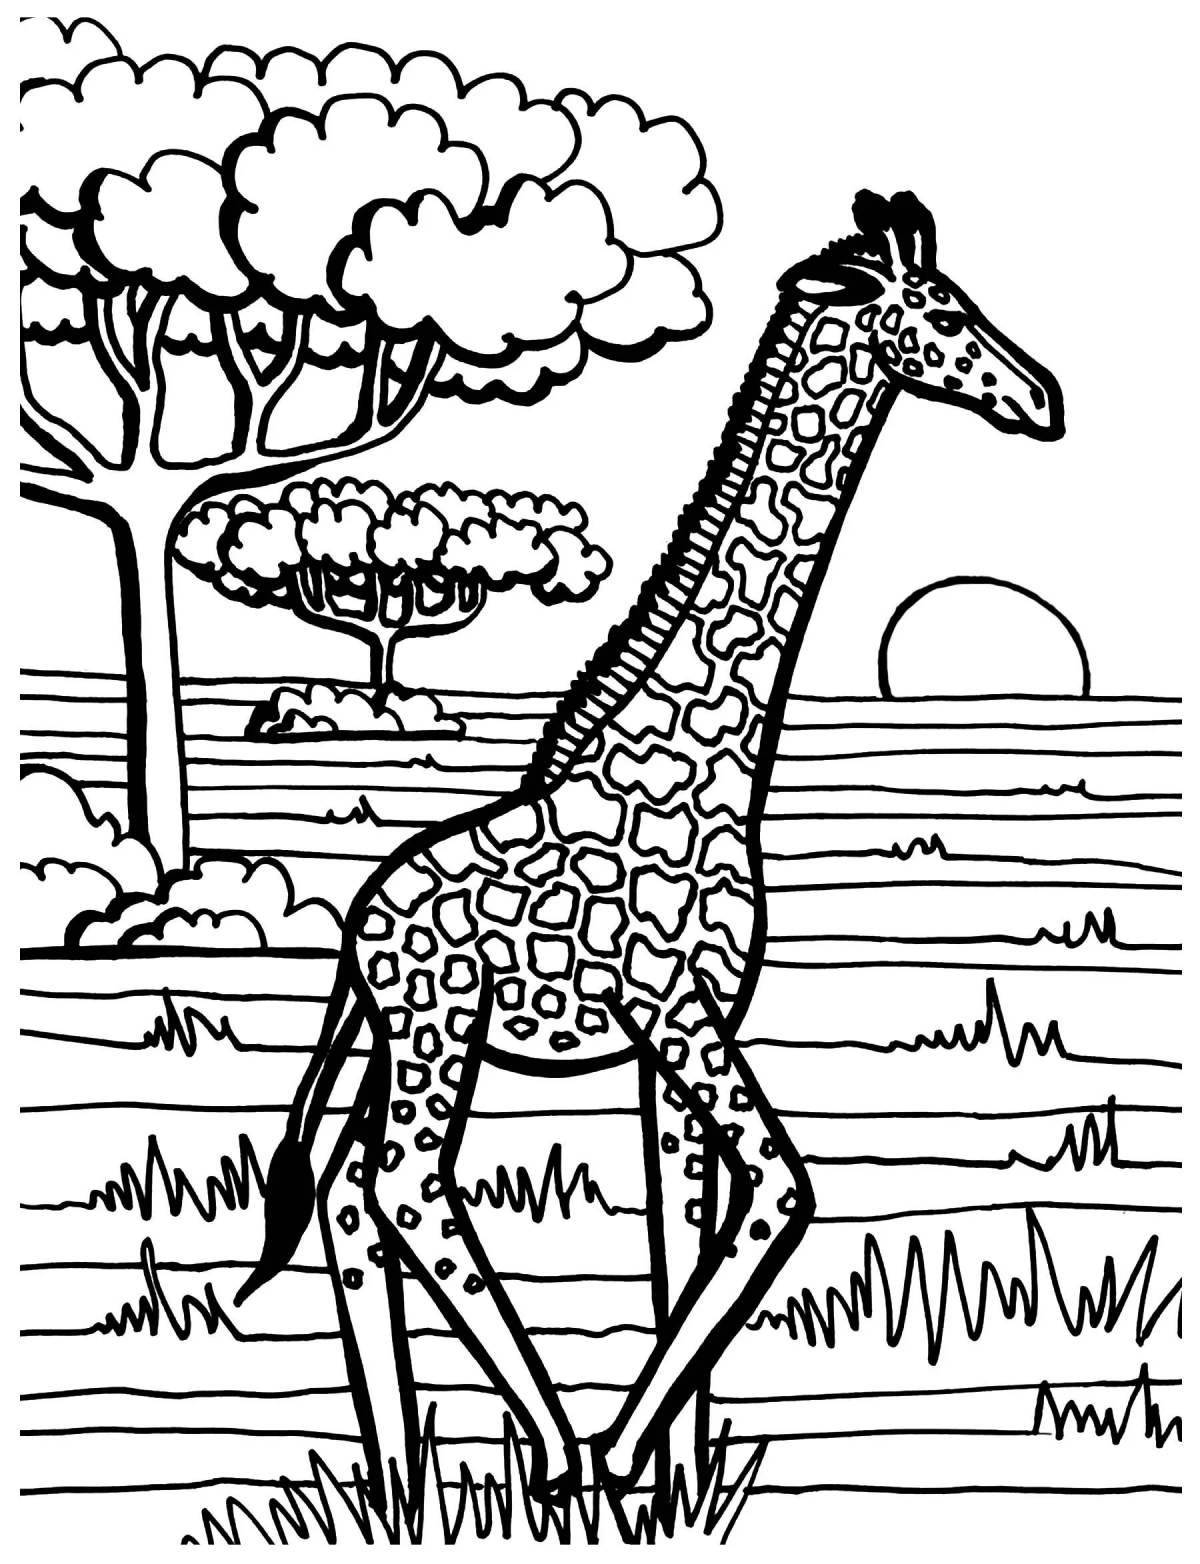 Colorful giraffe drawing for kids